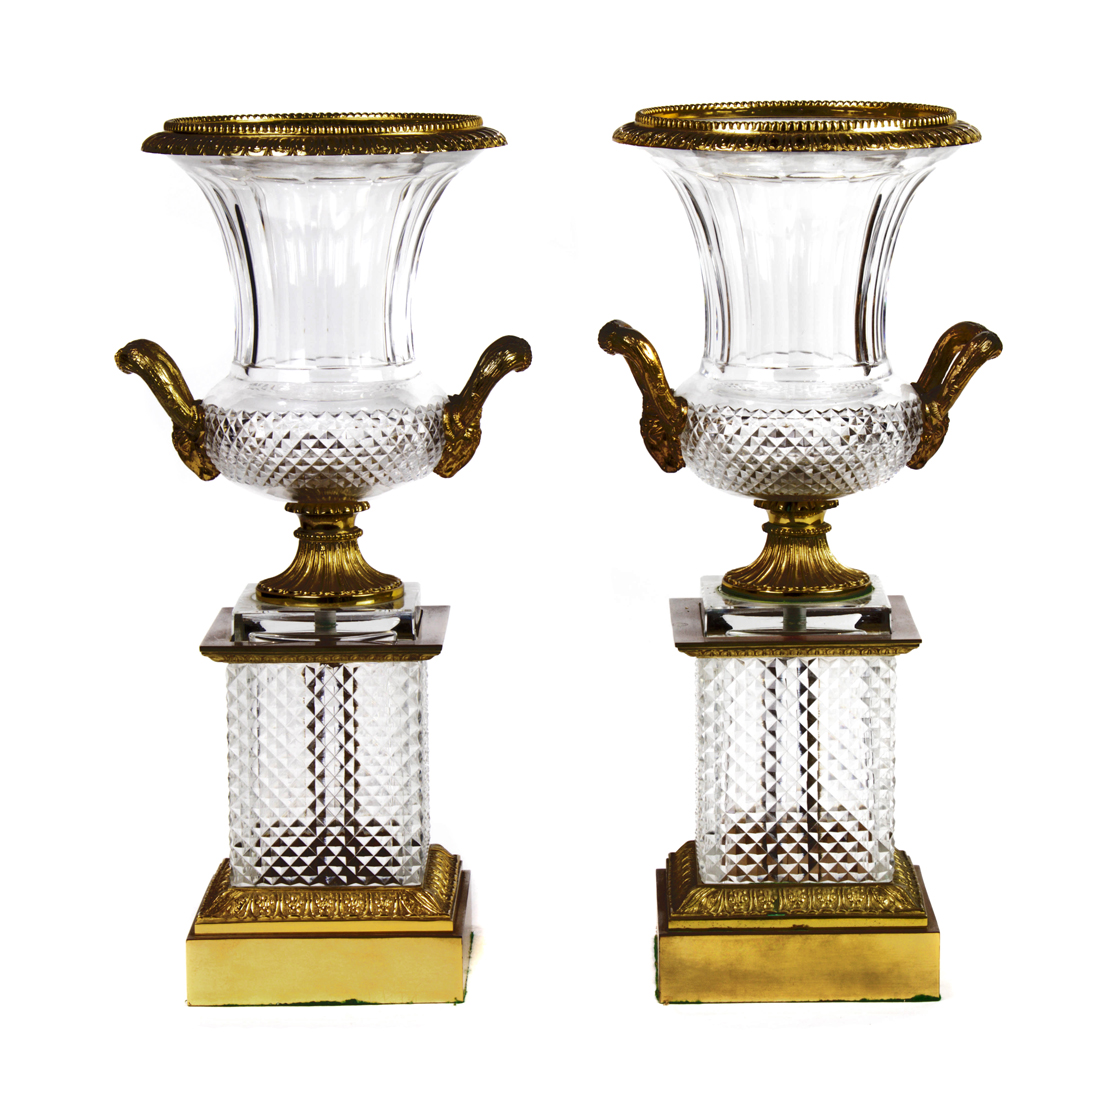 A PAIR OF NEOCLASSICAL STYLE GILT 3a1d2c